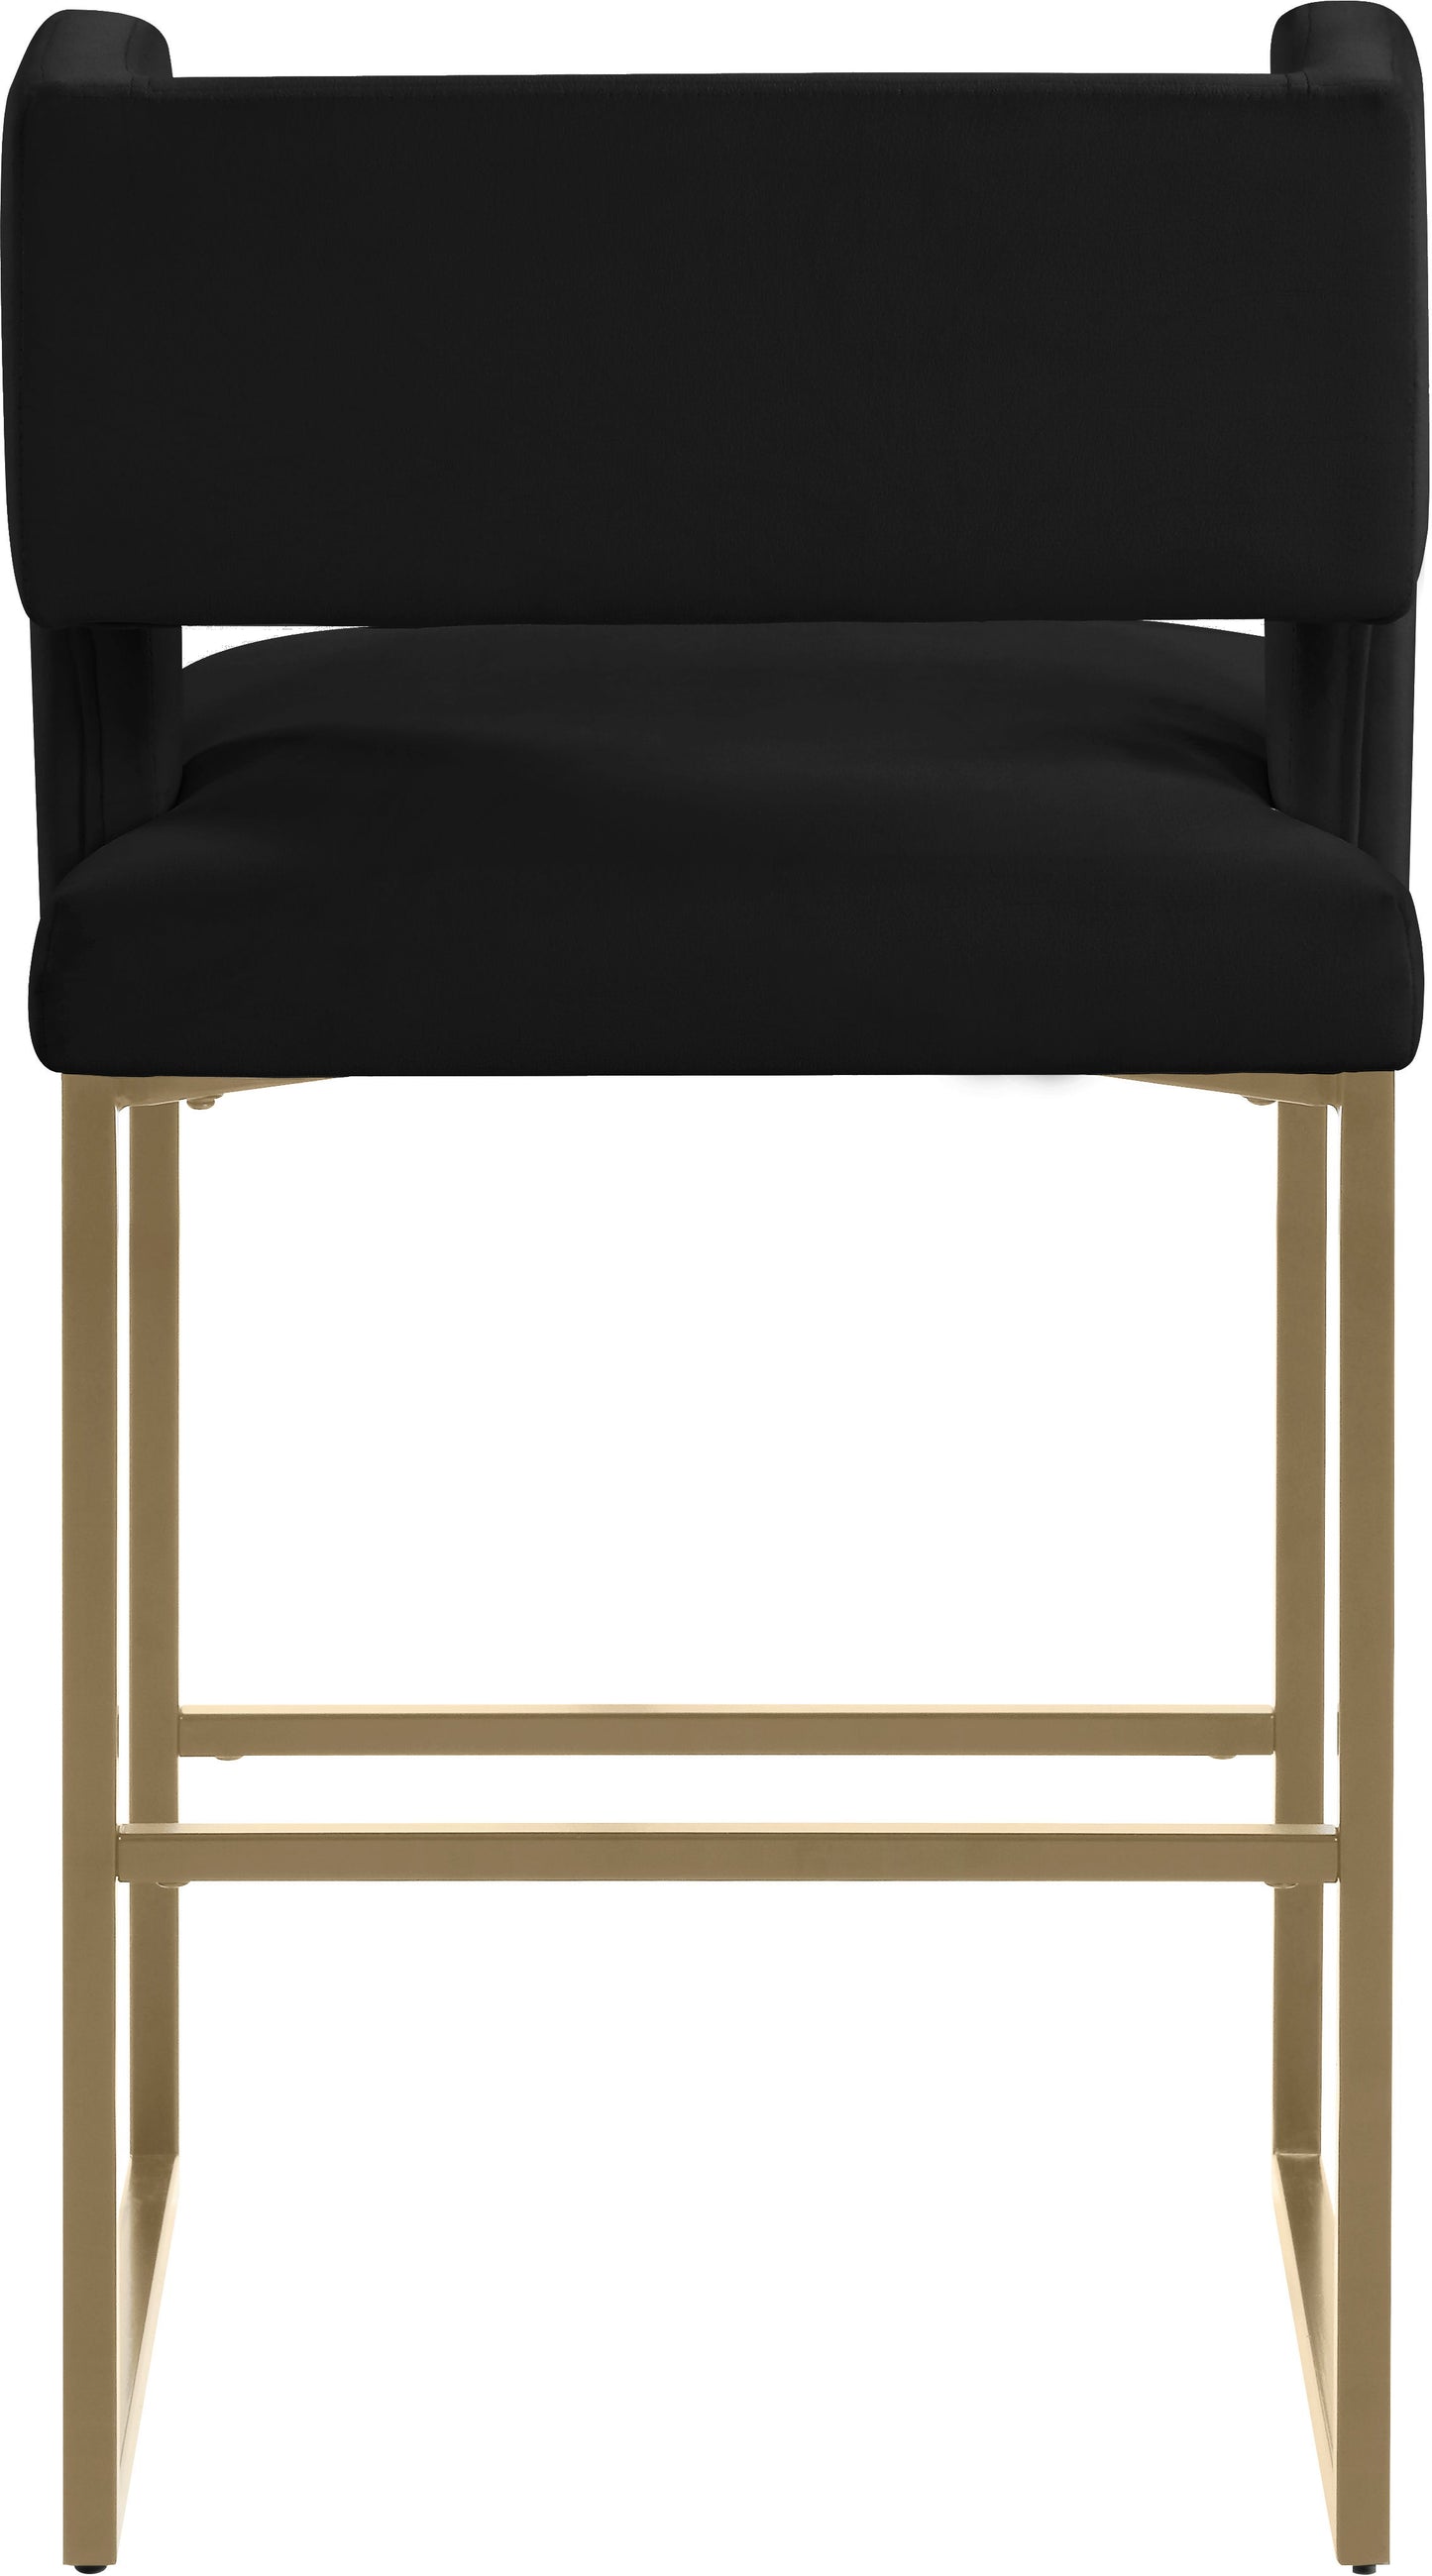 Caleb - Counter Stool with Gold Legs (Set of 2)